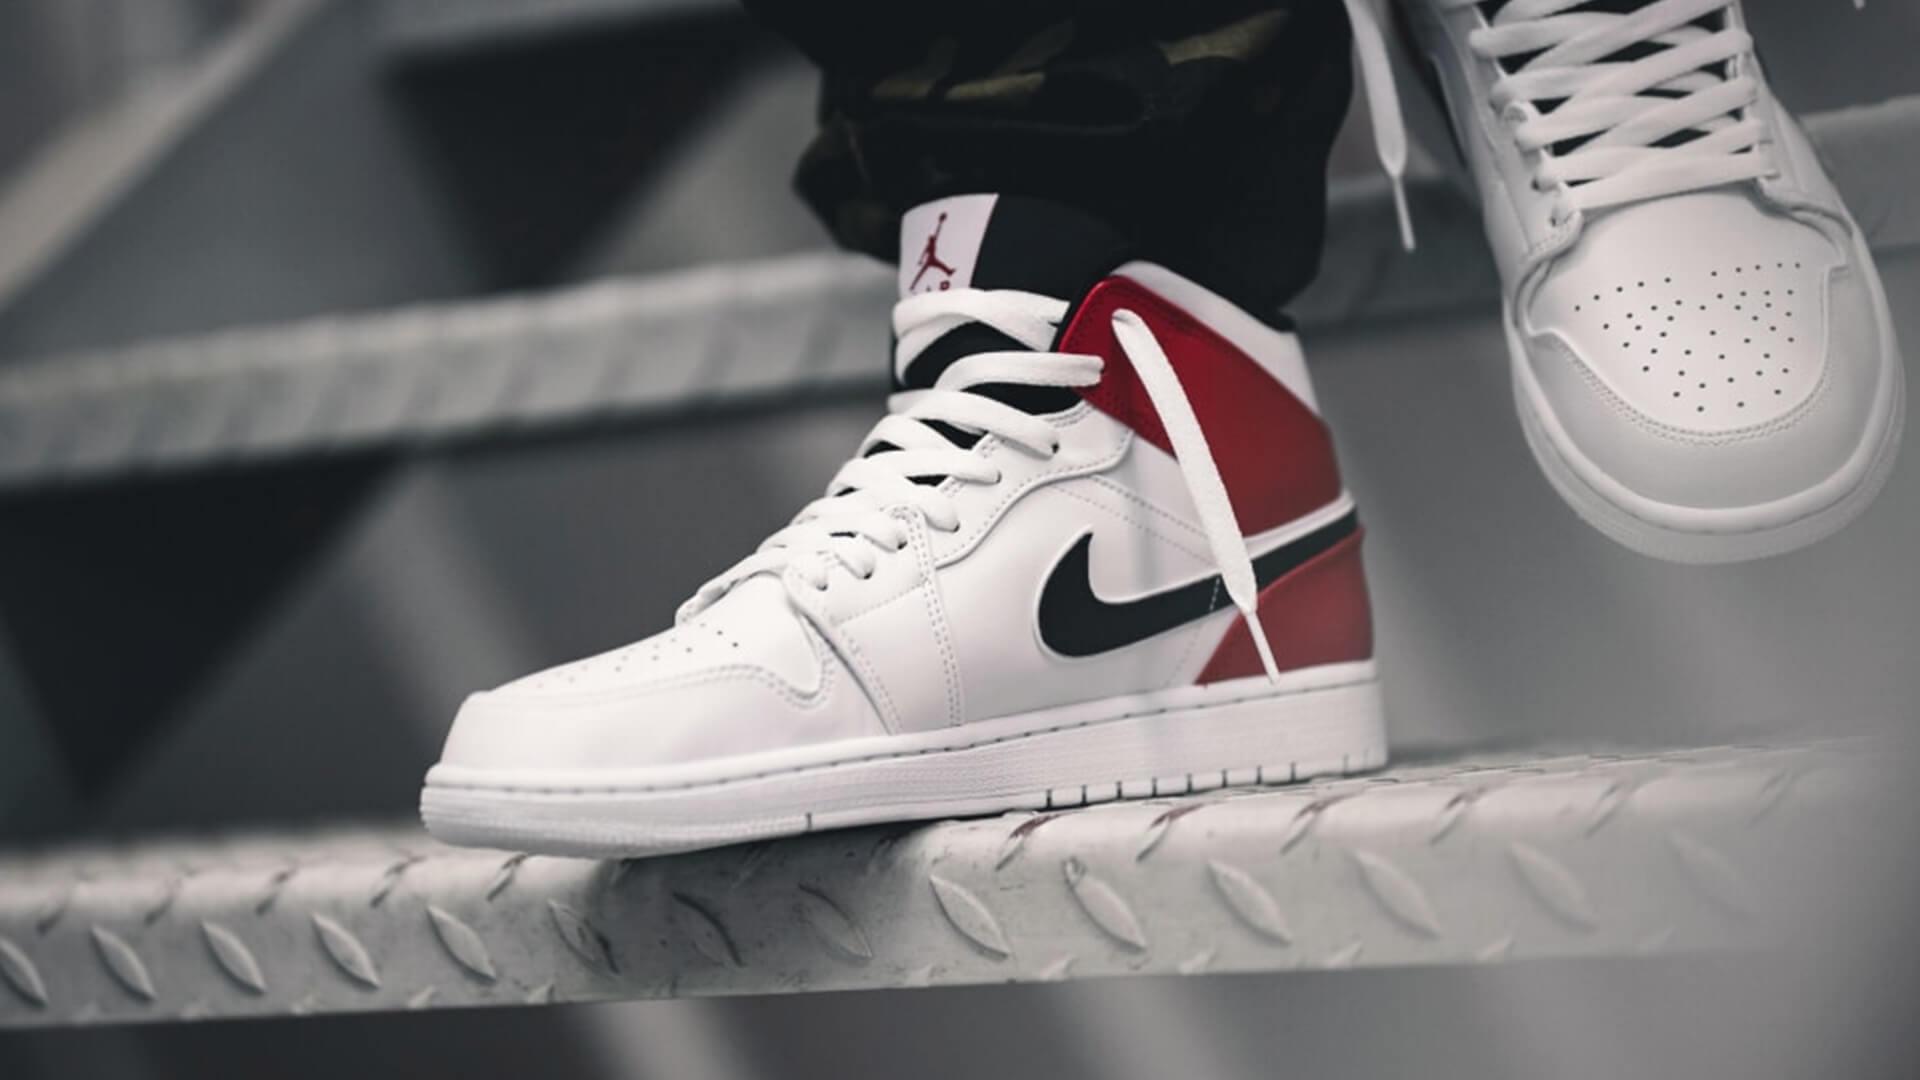 Latest Nike Air Jordan 1 Trainer Releases & Next Drops. The Sole Supplier